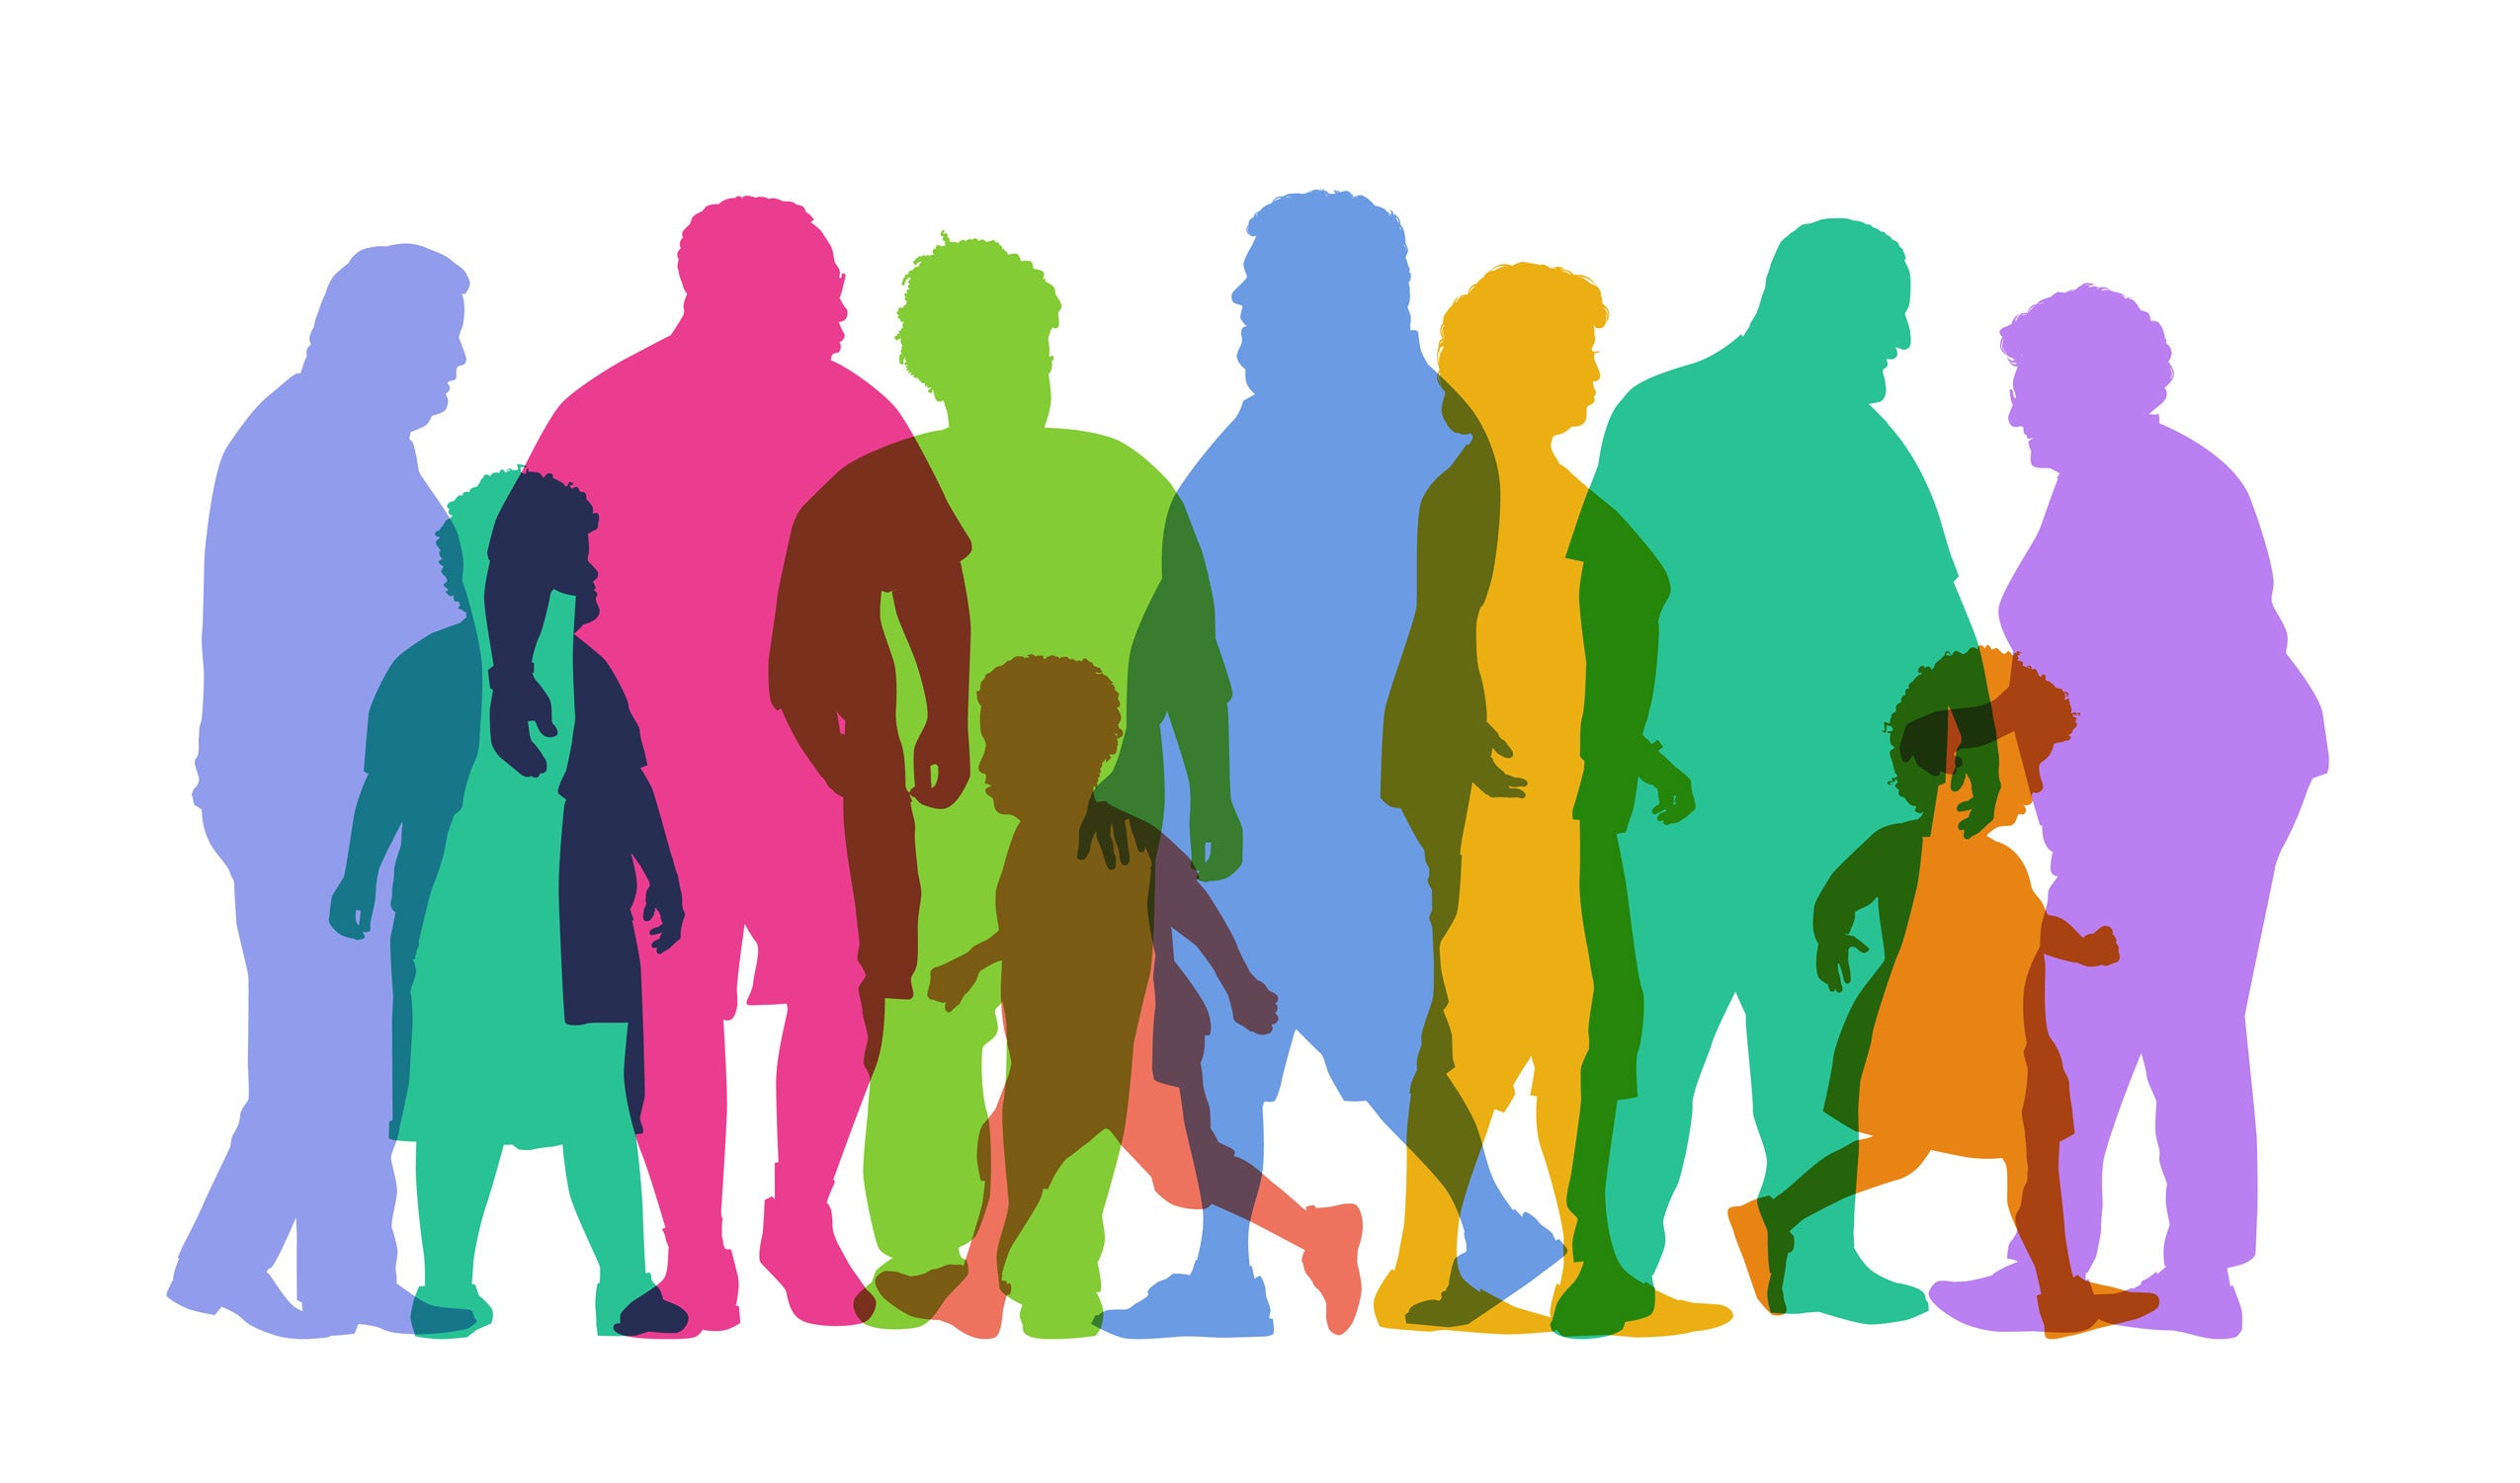 Colorful silhouettes of overweight people